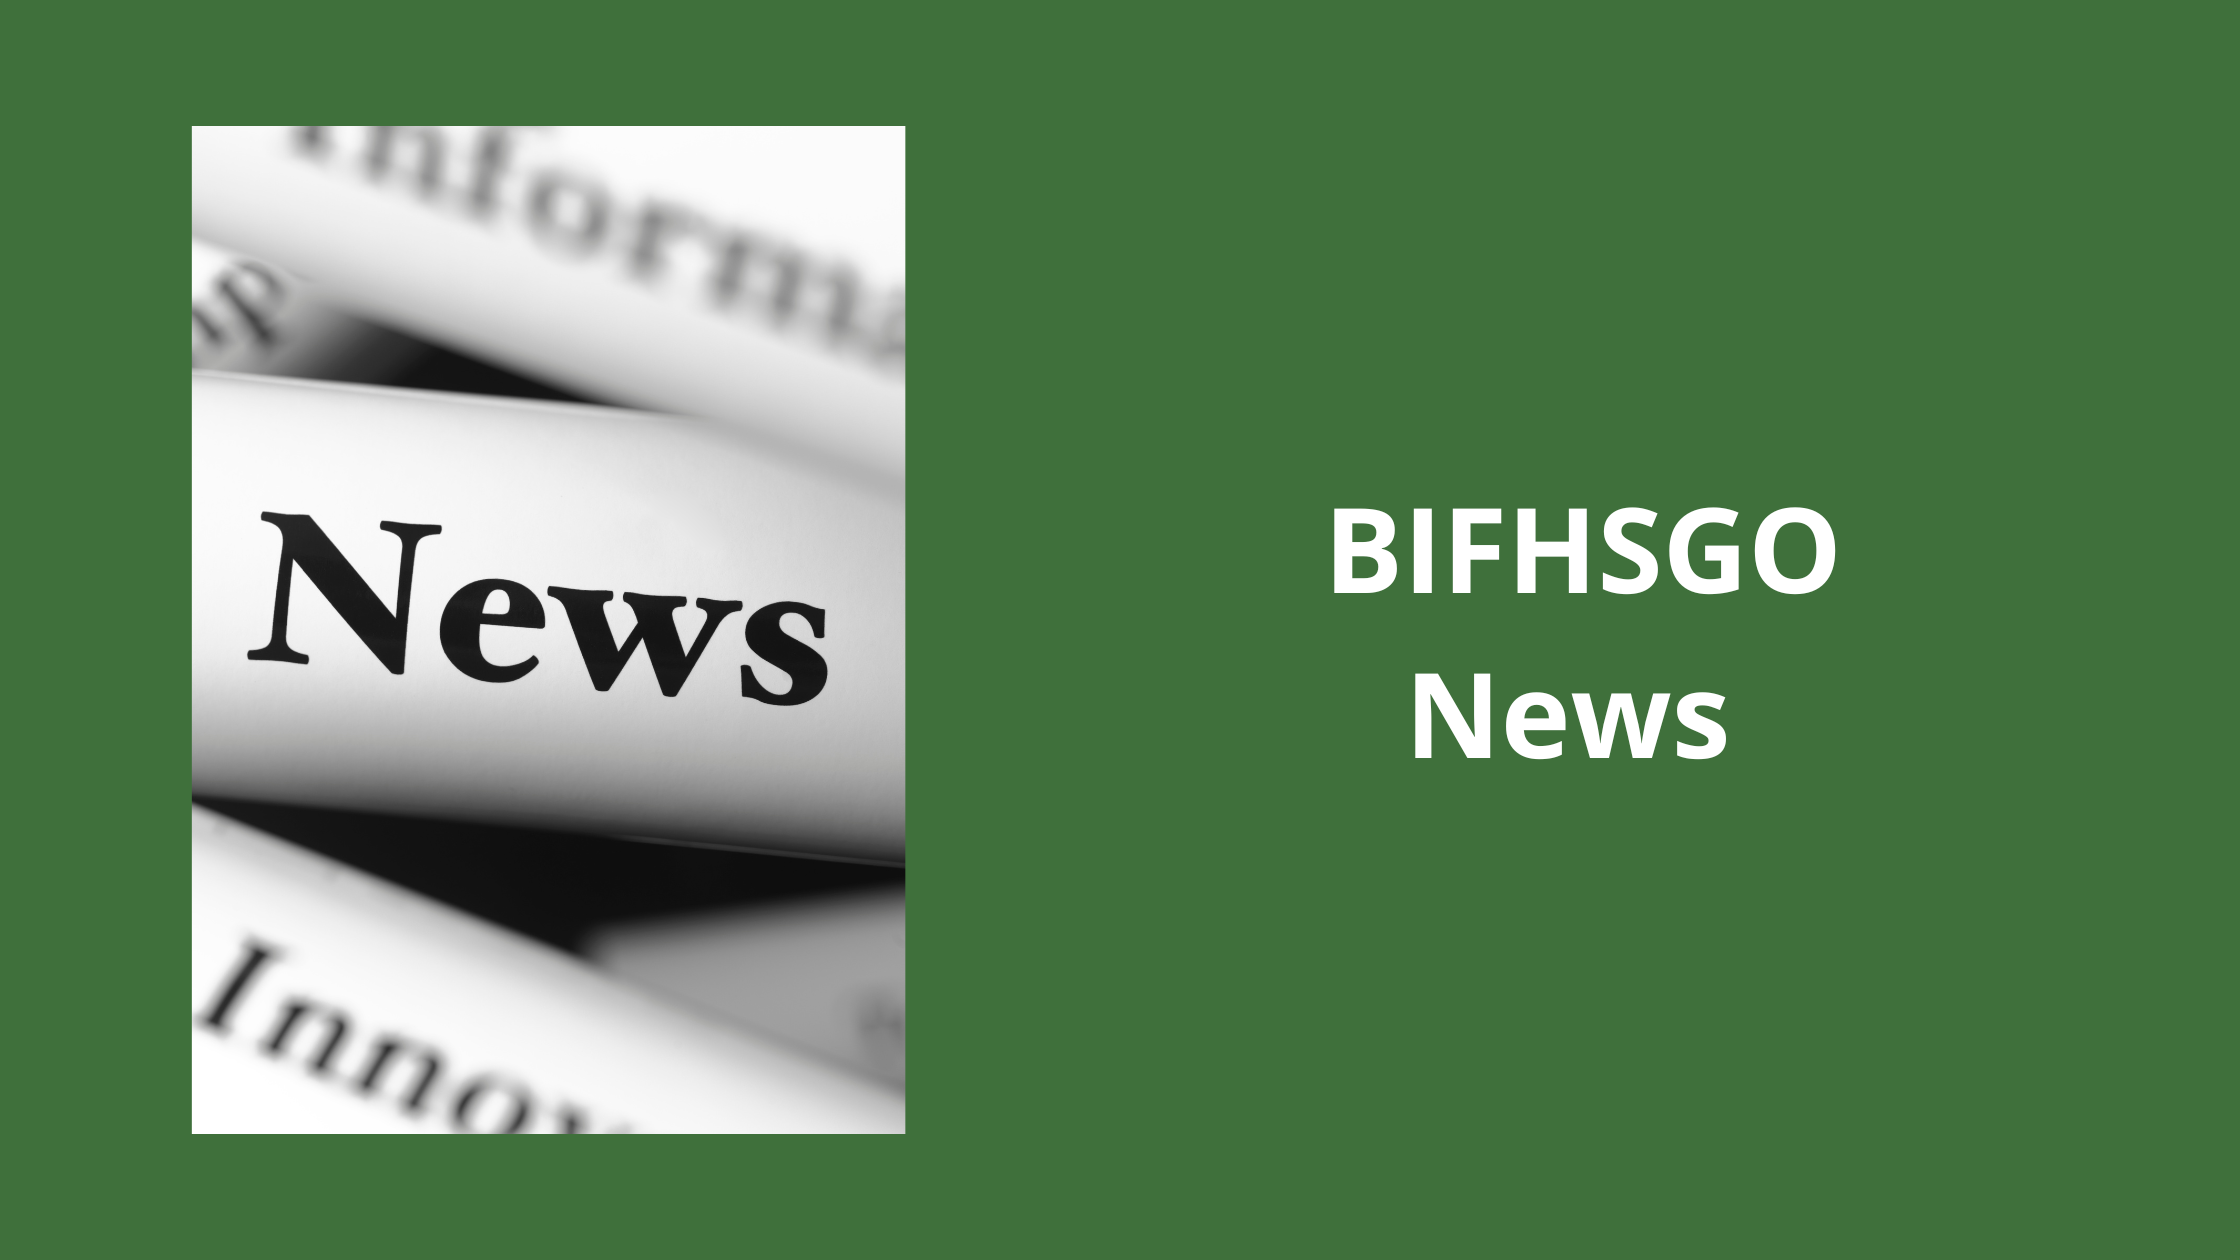 BIFHSGO Conference – October 26 & 27